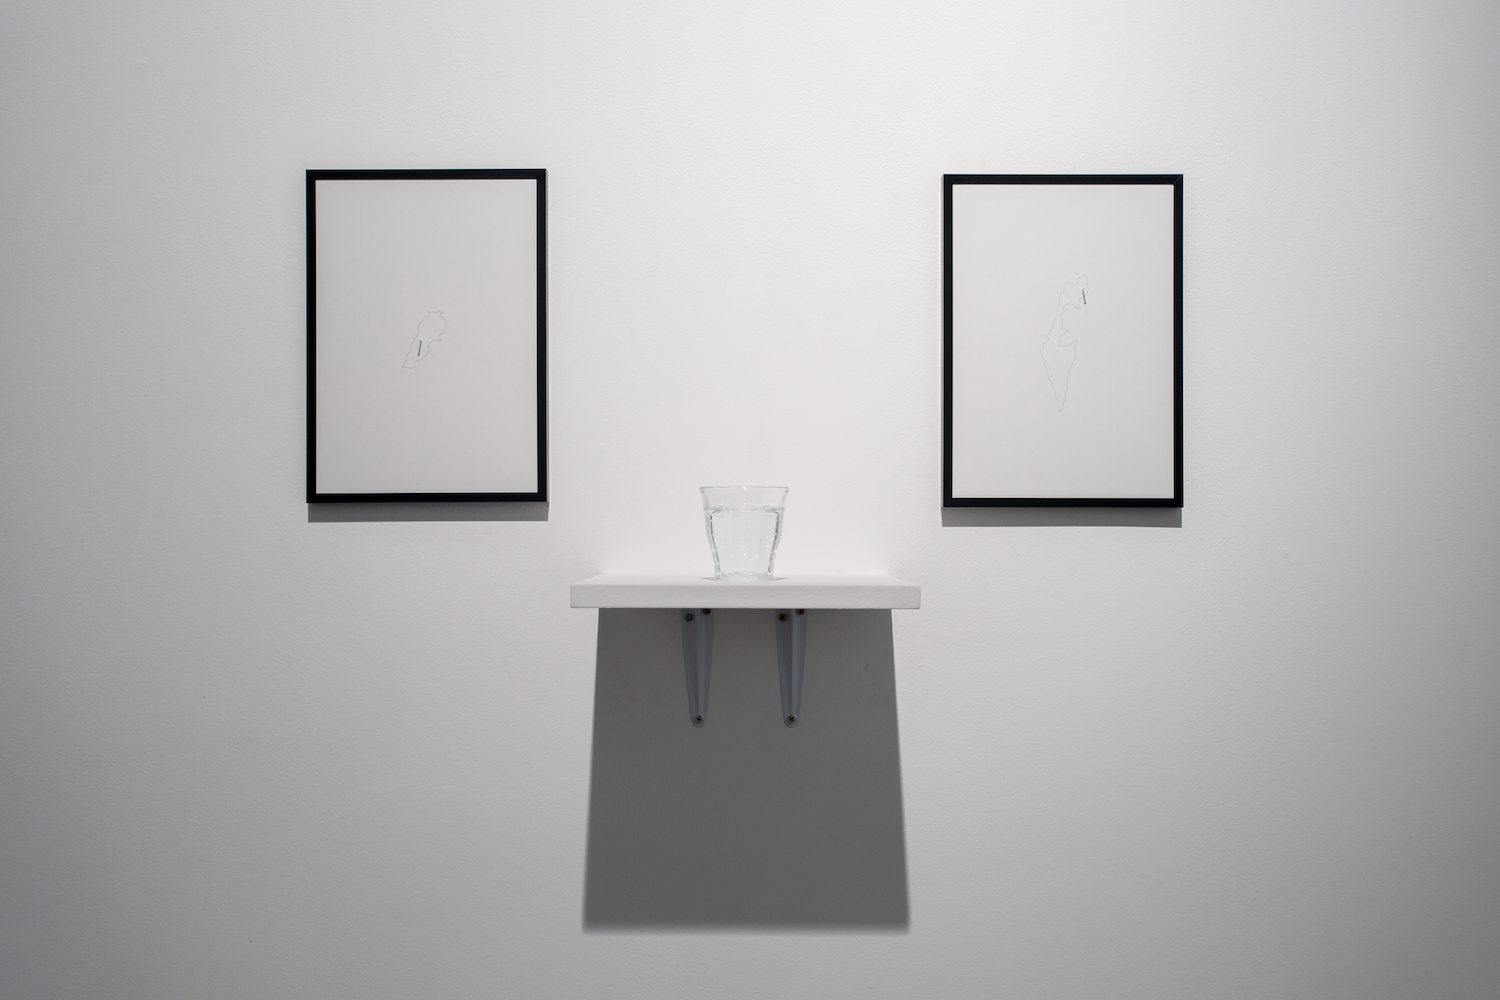  Charbel-joseph H. Boutros  Mixed Water, Lebanon, Israel 2013 Glass of water, an equal mix of Lebanese mineral water (Sohat) and Israeli mineral water (Eden), wooden shelf, inkjet print on recycled paper, painted nails Dimensions variable Edition 1/3